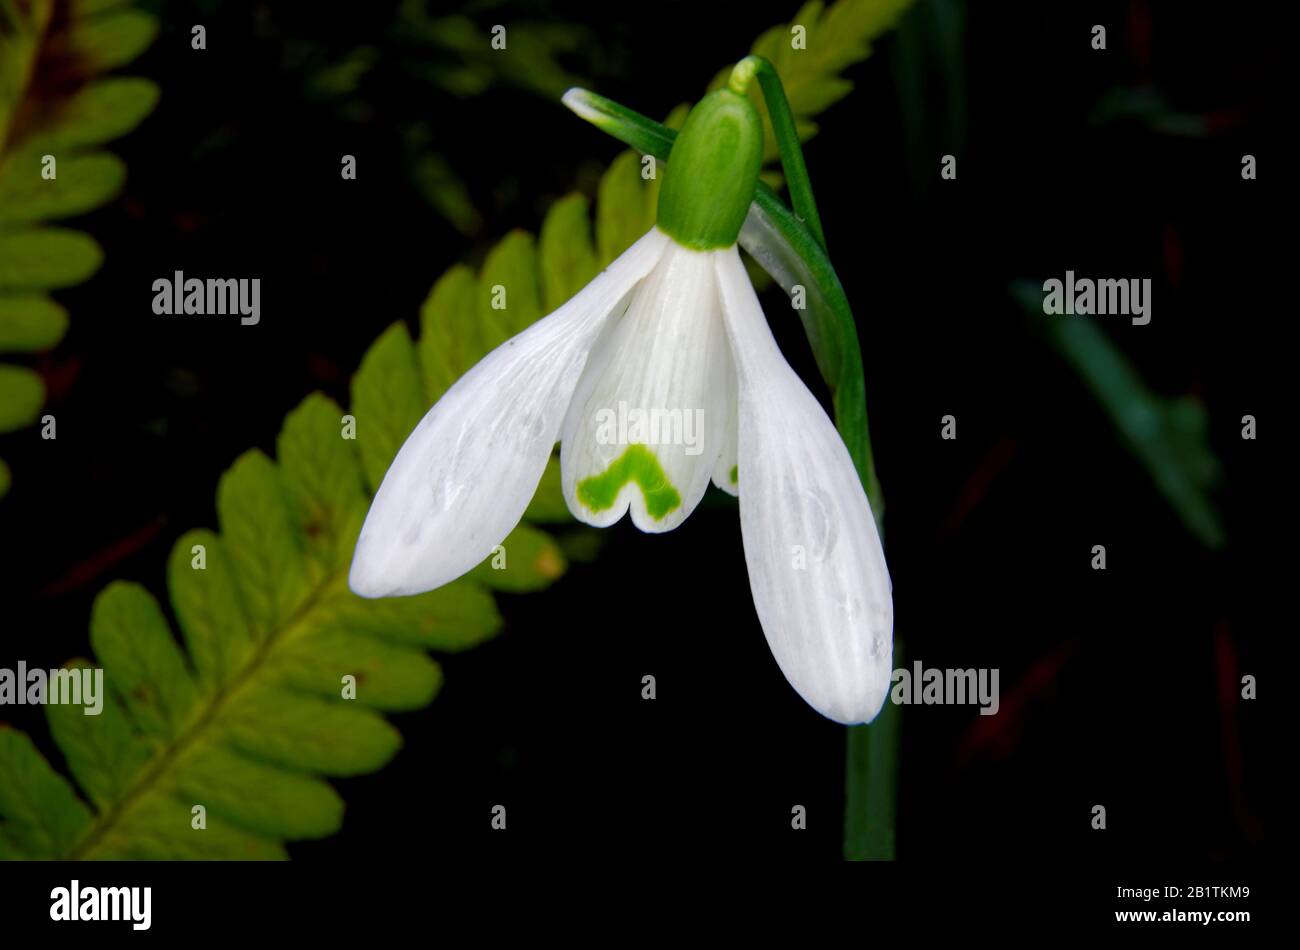 single flower of a snowdrop Galanthus nivalis against a dark, blurred background Stock Photo